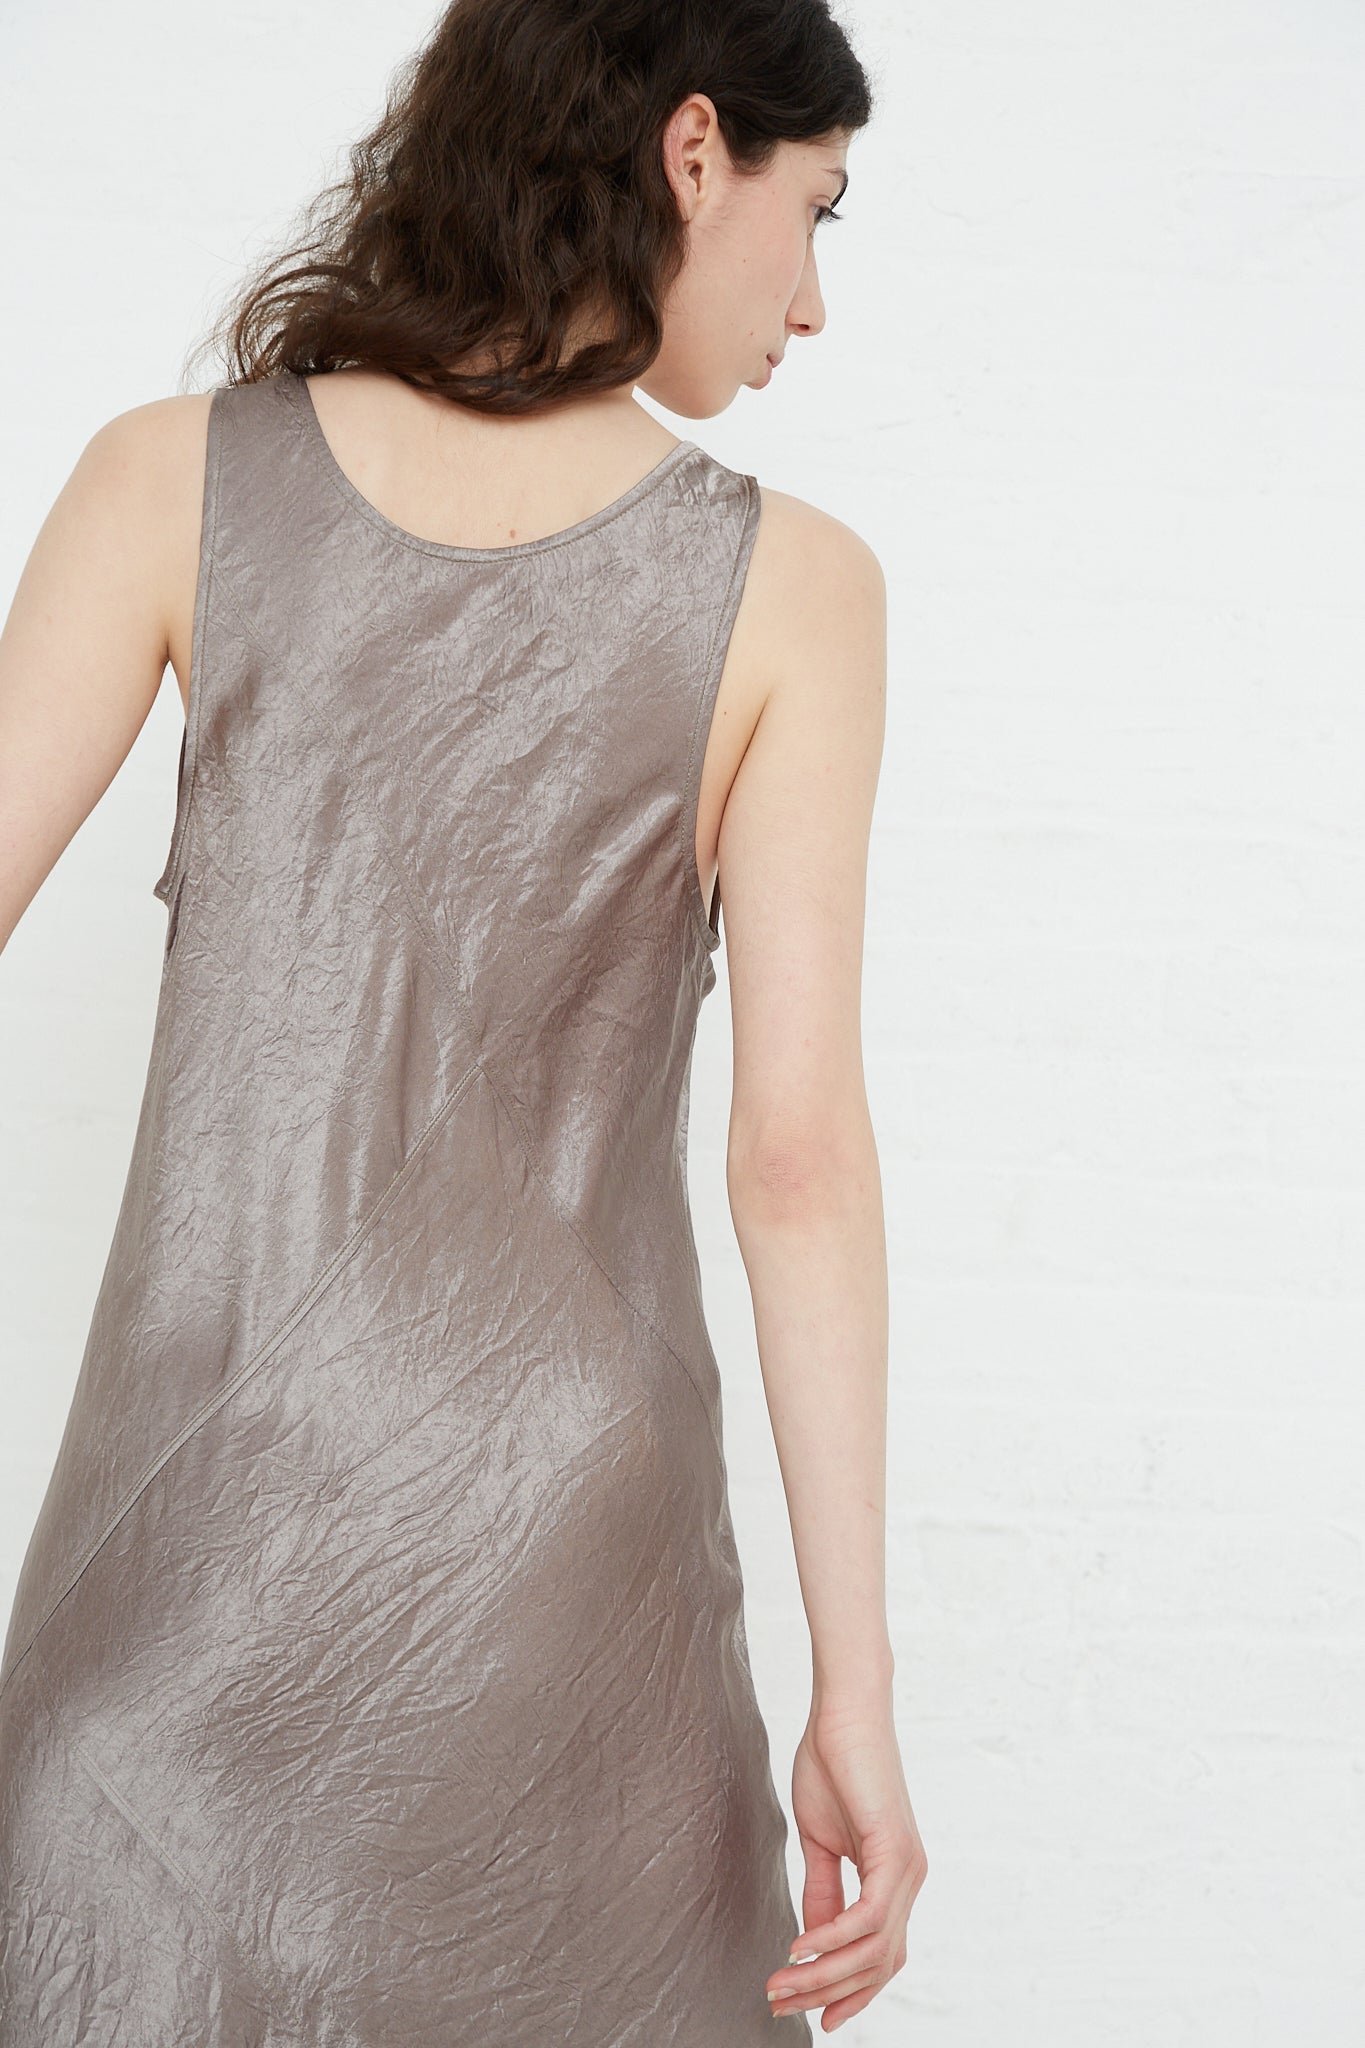 The back view of a woman wearing a Lauren Manoogian Luster Bias Dress in Laurel.